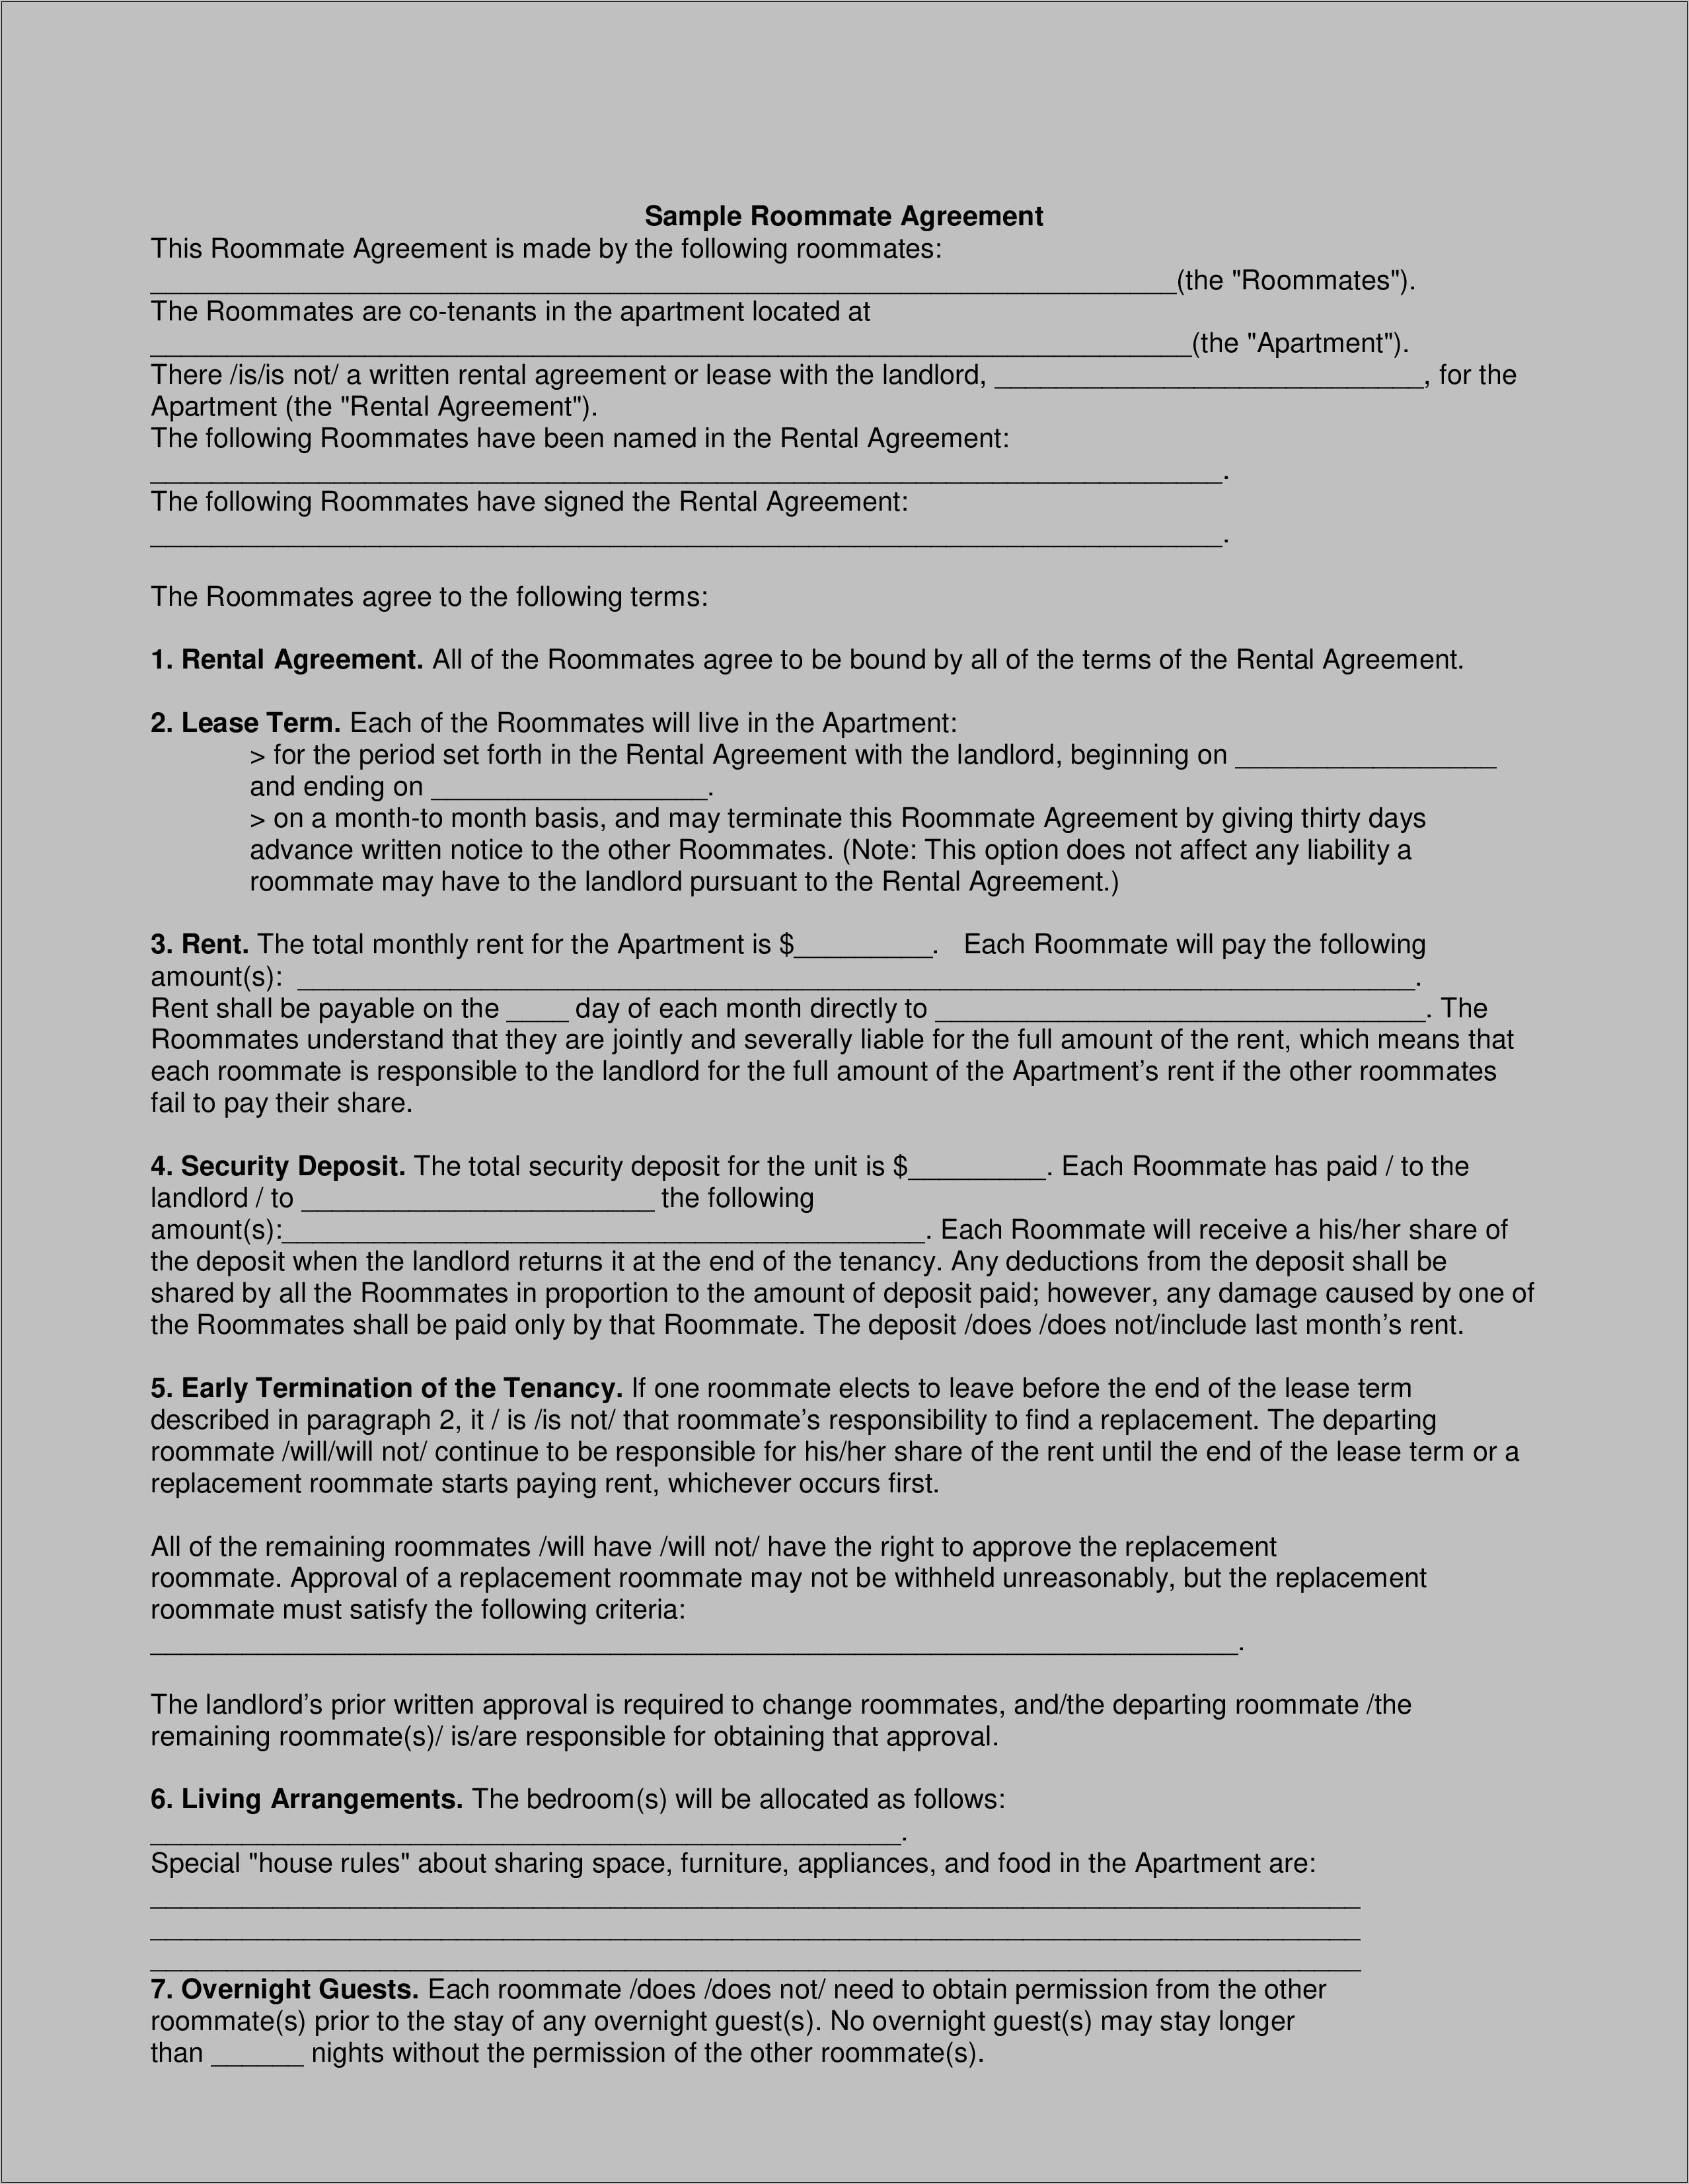 Roommate Agreement Template Free